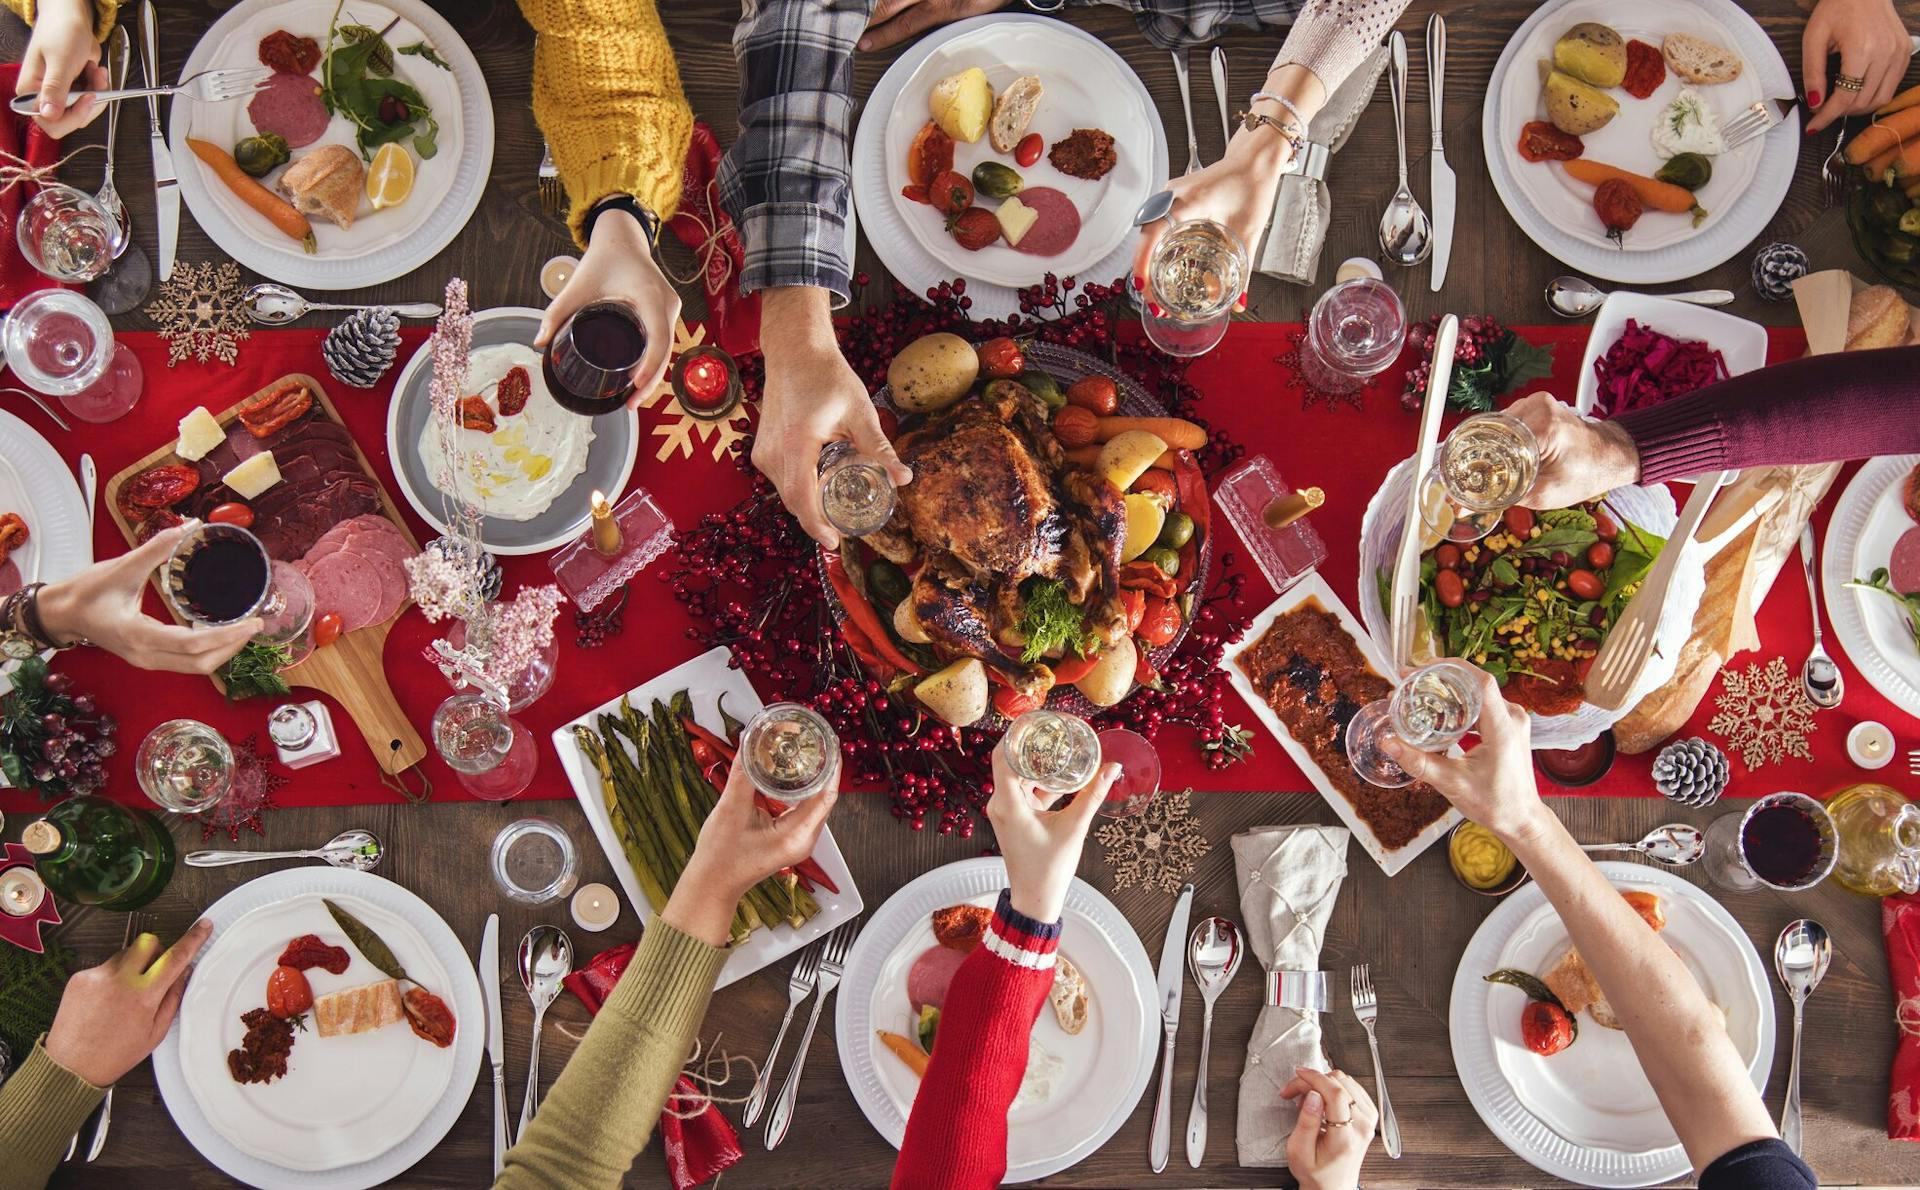 The Restaurant’s Guide to Christmas: Marketing & Promotion Ideas